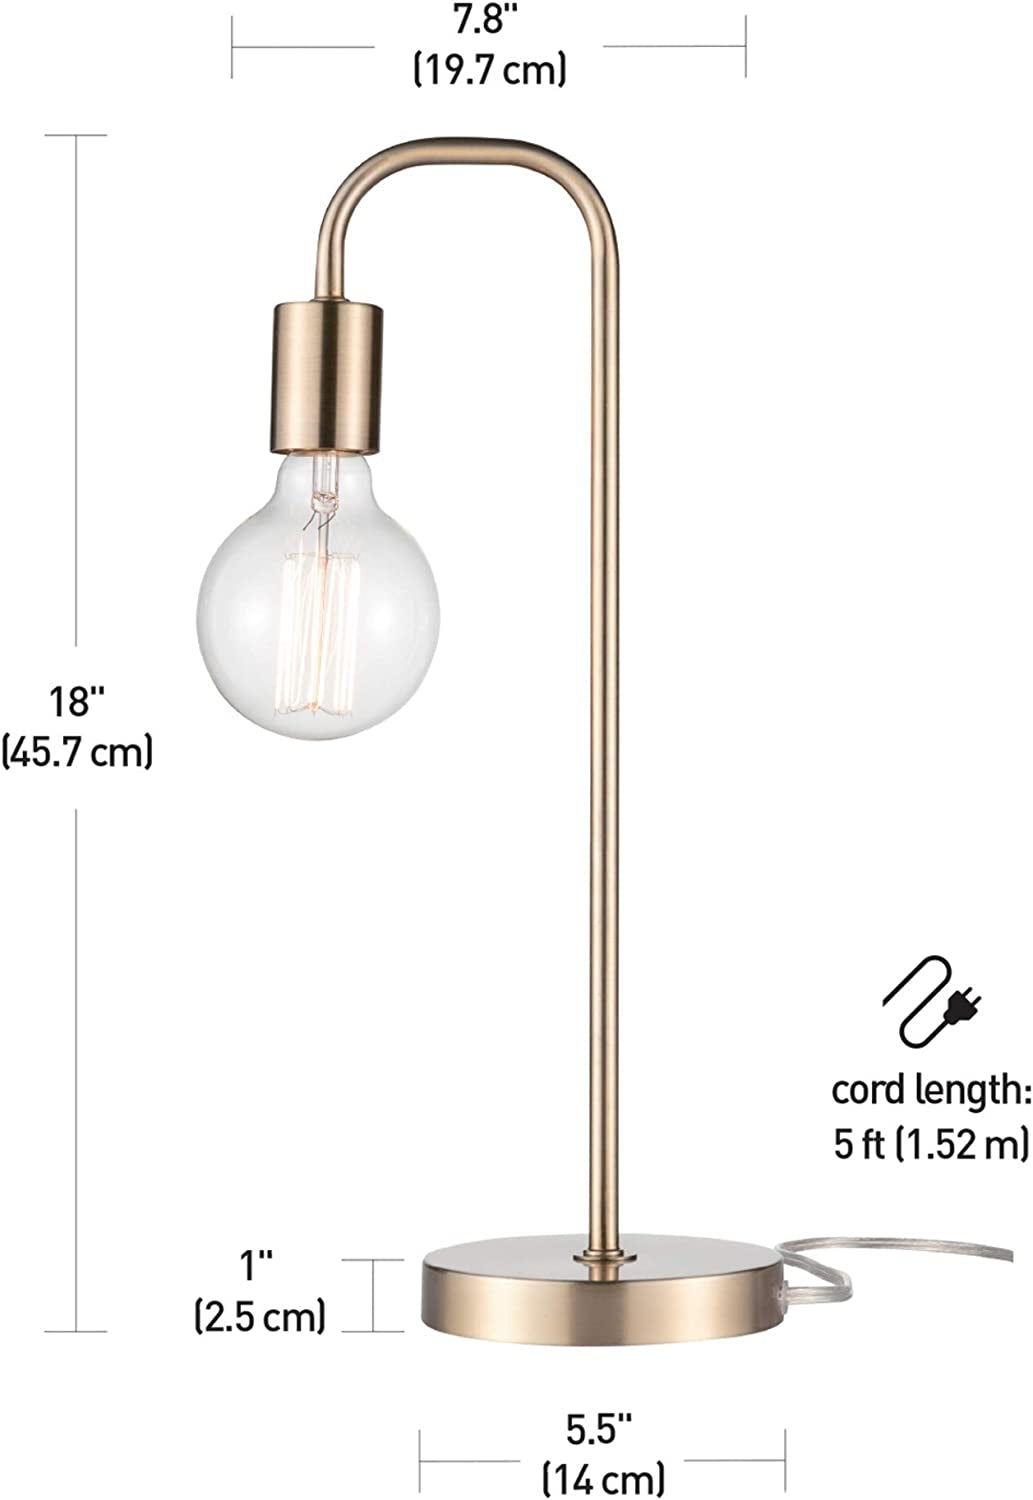 Globe Electric 67433 18" Table Lamp, Matte Brass, Table Lamp for Living Room, Home Décor, Lamps for Bedrooms, Room Décor, Nightstand, Home Improvement, Reading Lamp, E26 Base Socket, Home Décor